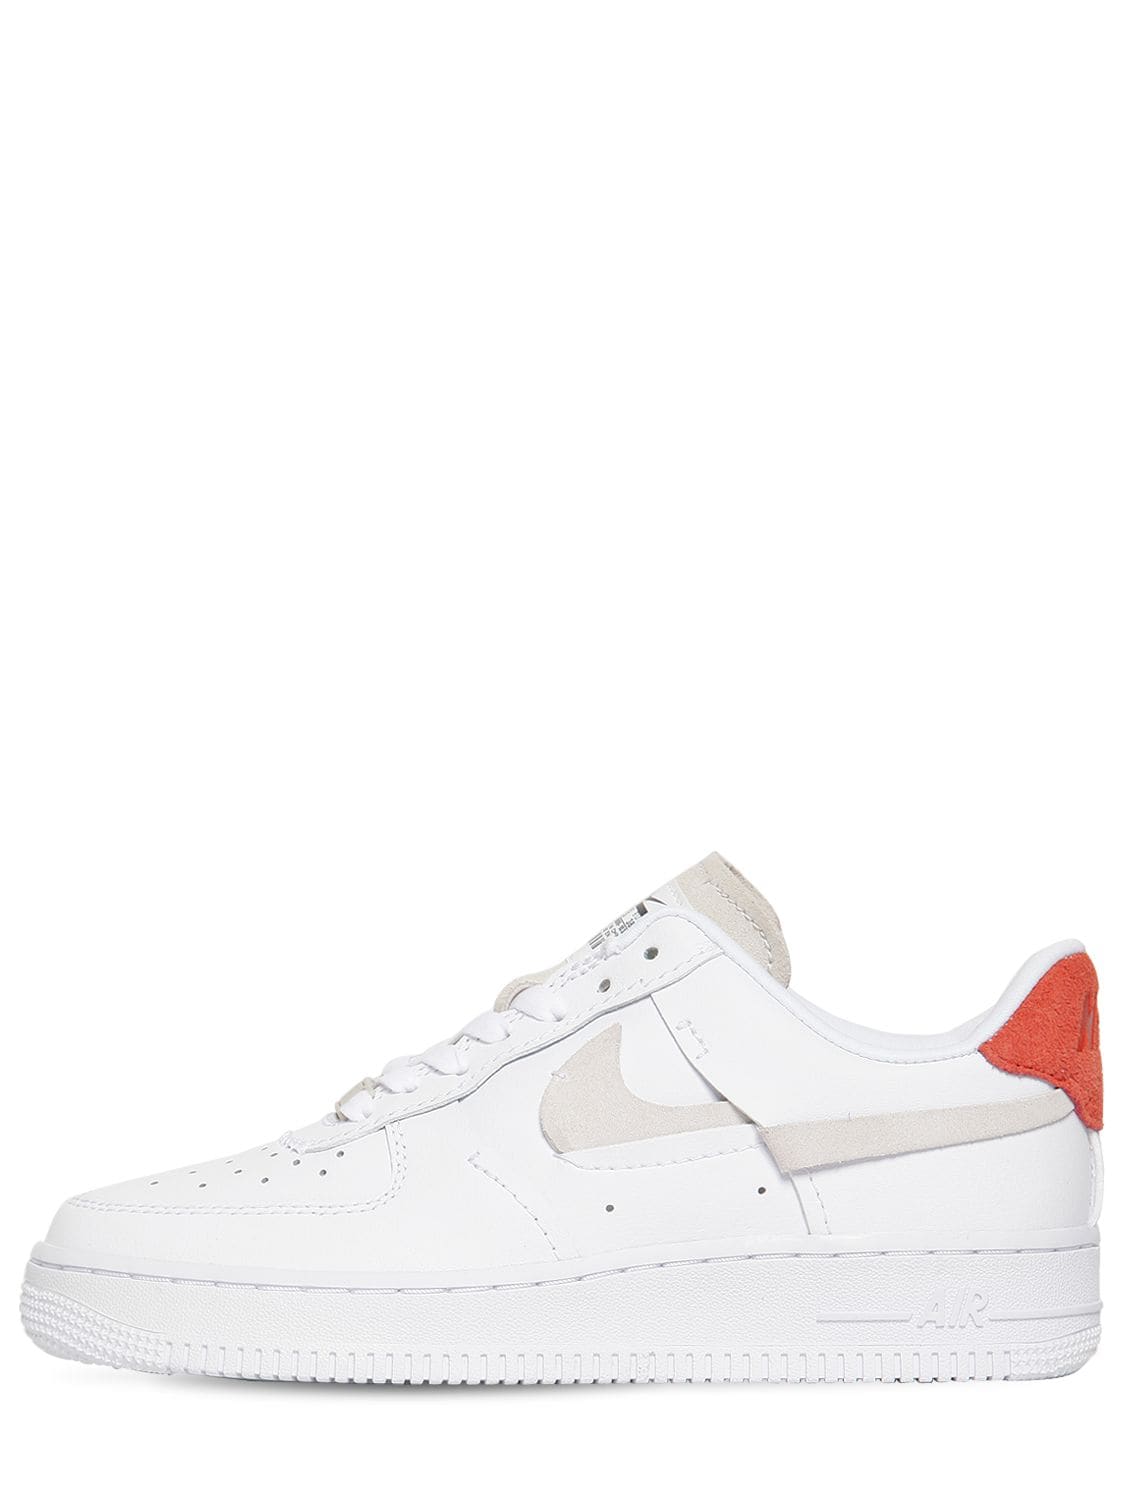 Nike Air Force 1 '07 Lx Sneakers In White